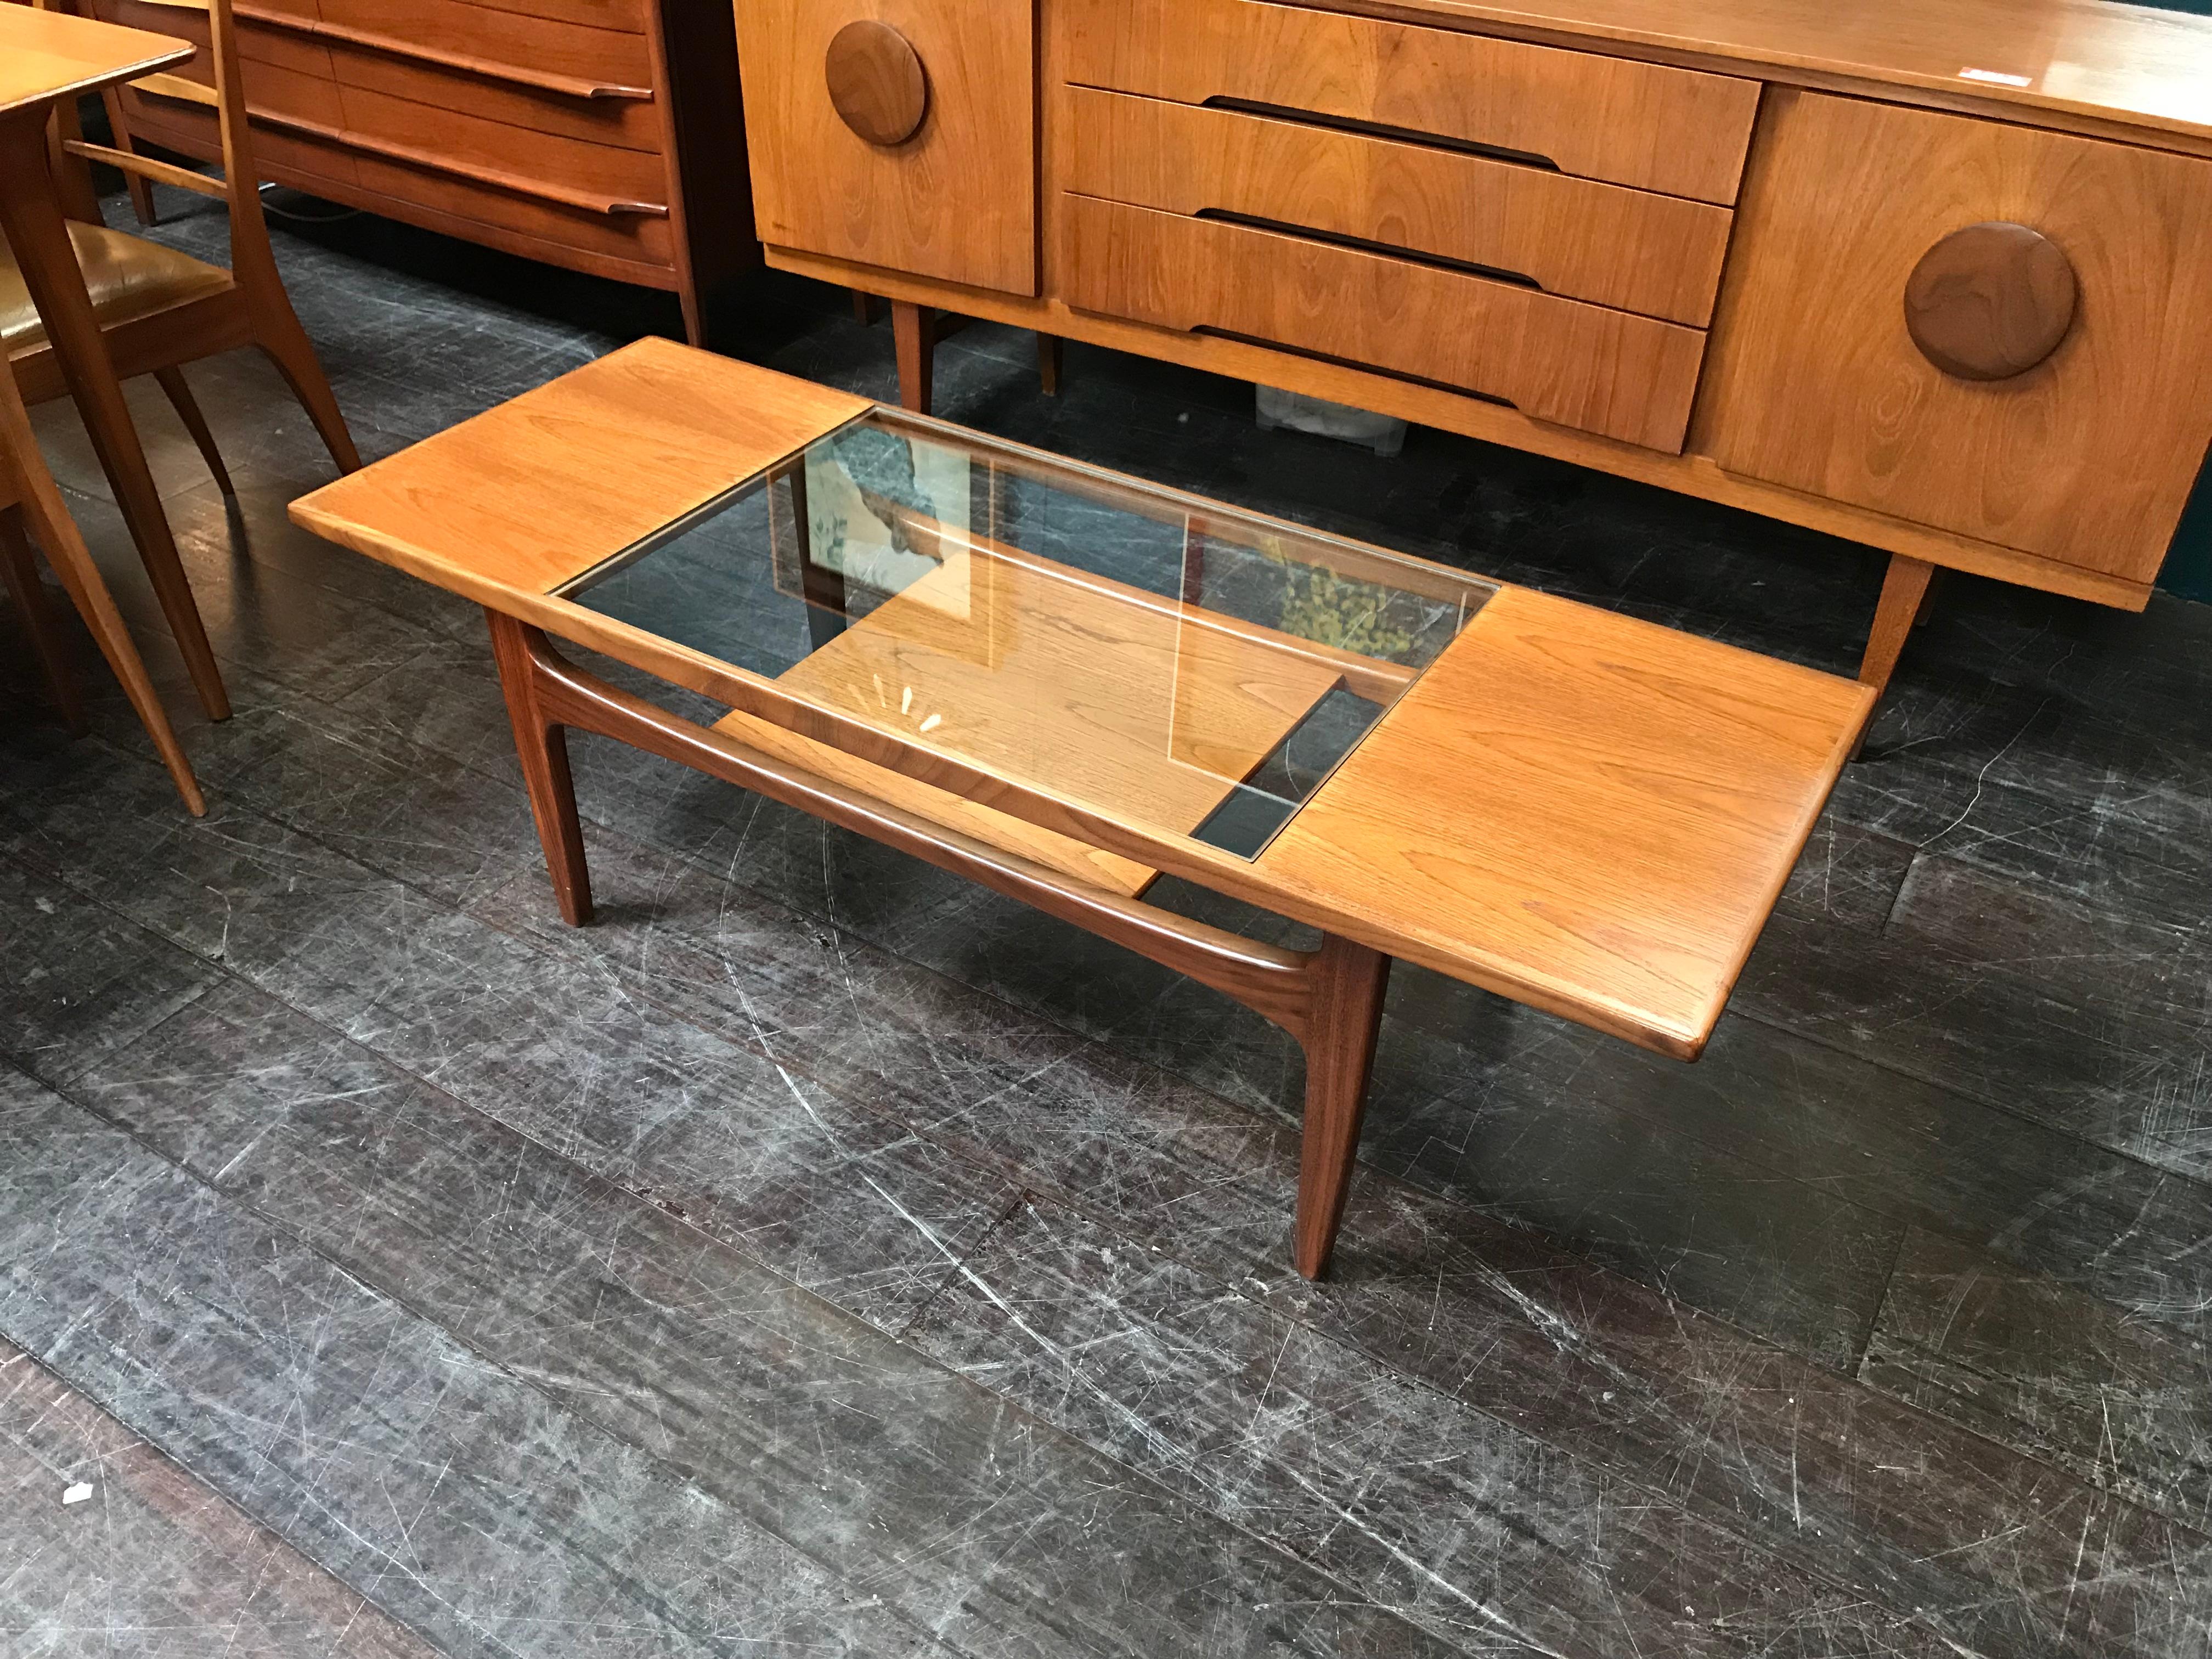 A vintage teak coffee table made by G Plan in the 1960s. This ultra cool retro coffee table is often now referred to as the ‘Mad Men’ table due to its regular appearances in the hit television series of the same name. It’s such an elegant piece of